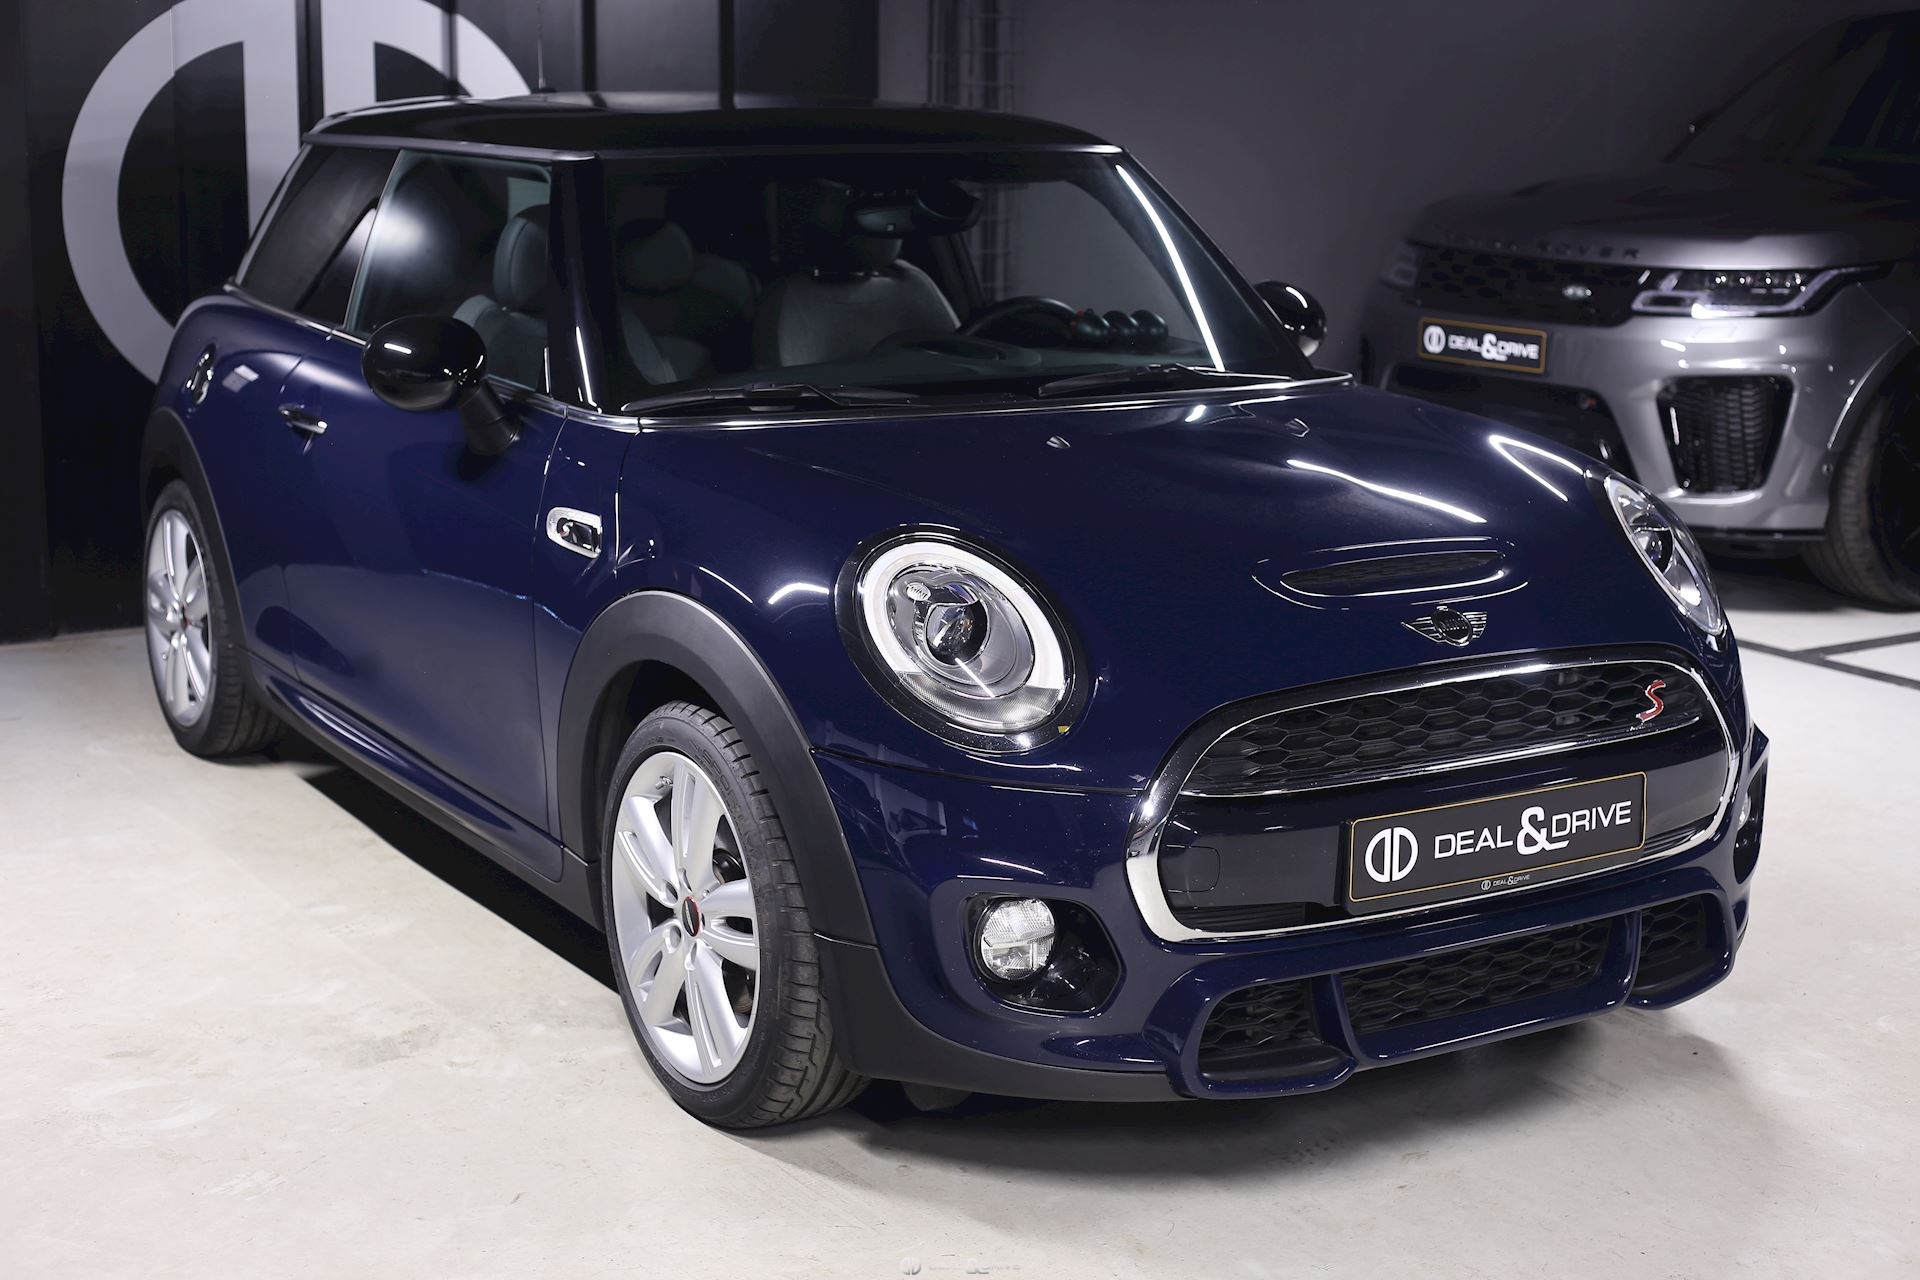 MINI COOPER S 3 PORTES PACK WORKS - Deal & Drive